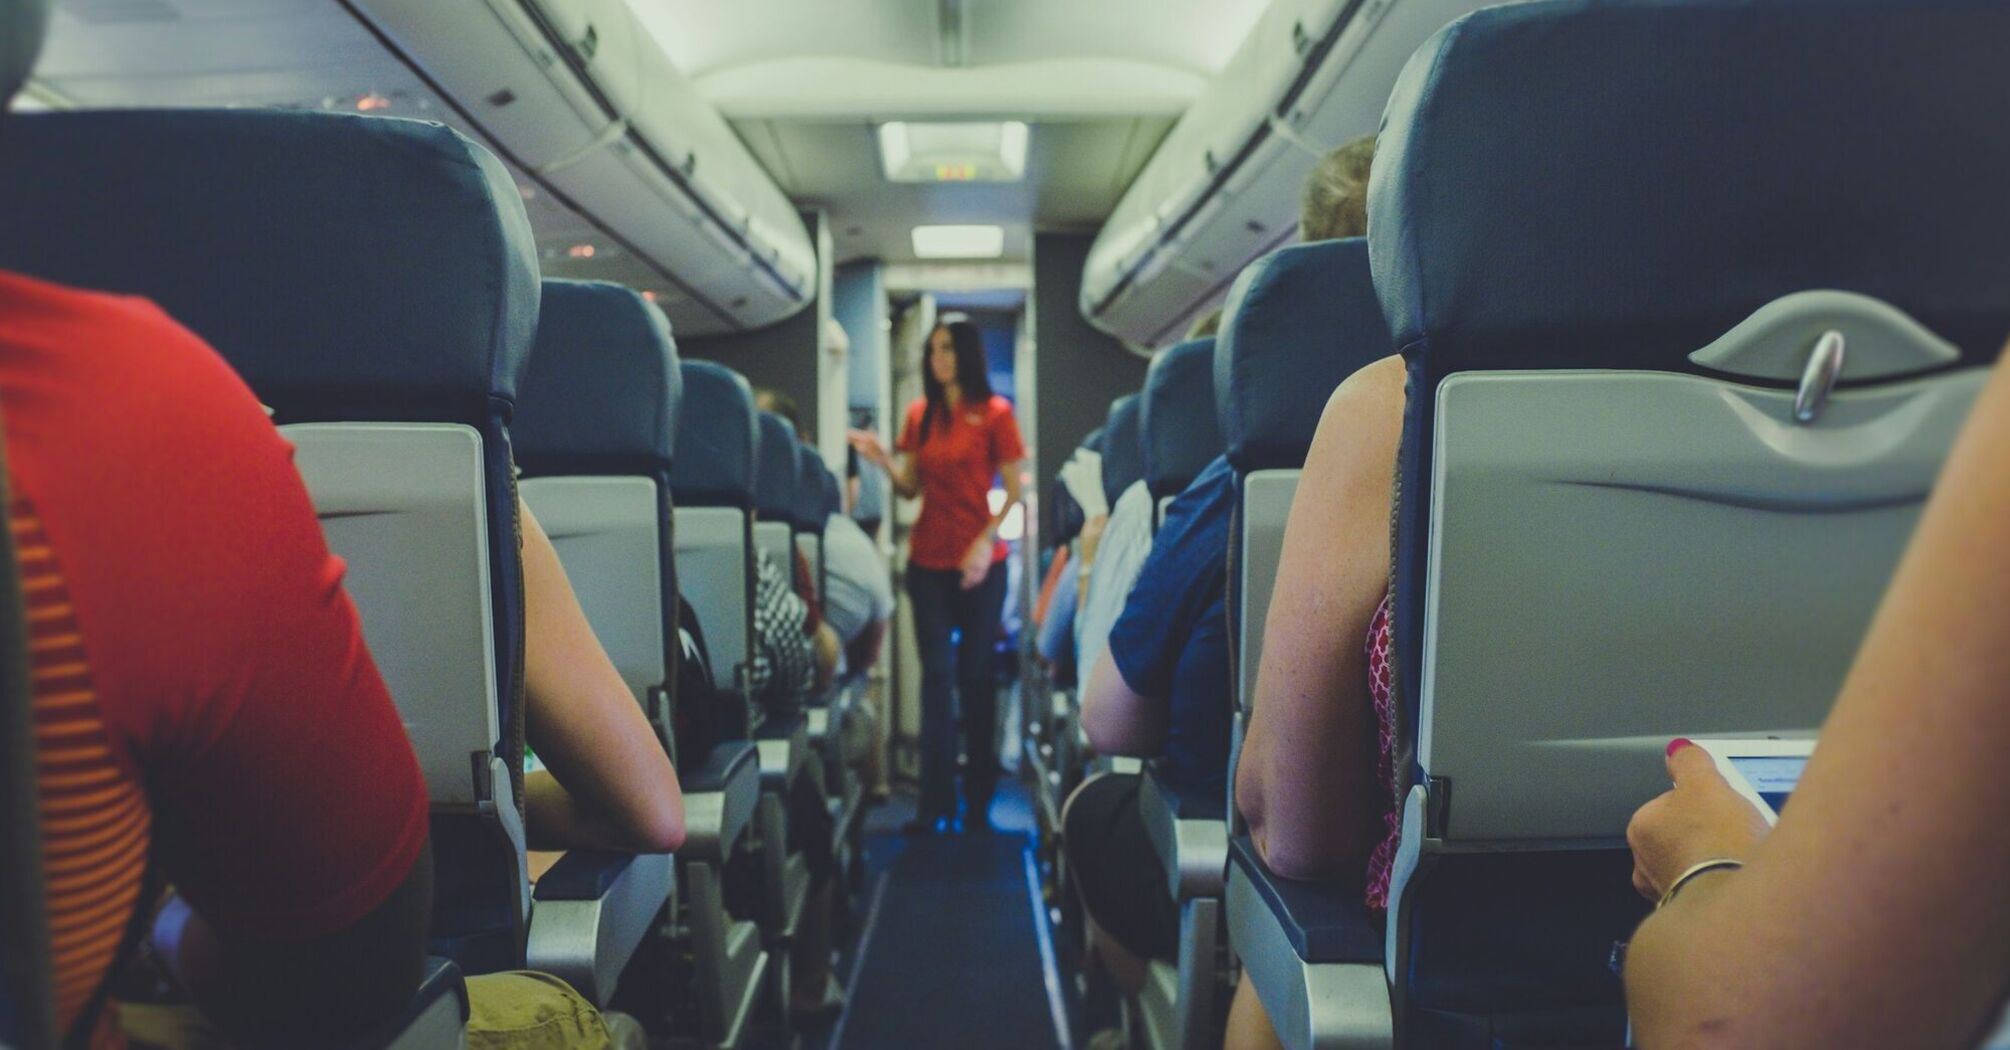 Passengers seated on an airplane with a flight attendant in the aisle